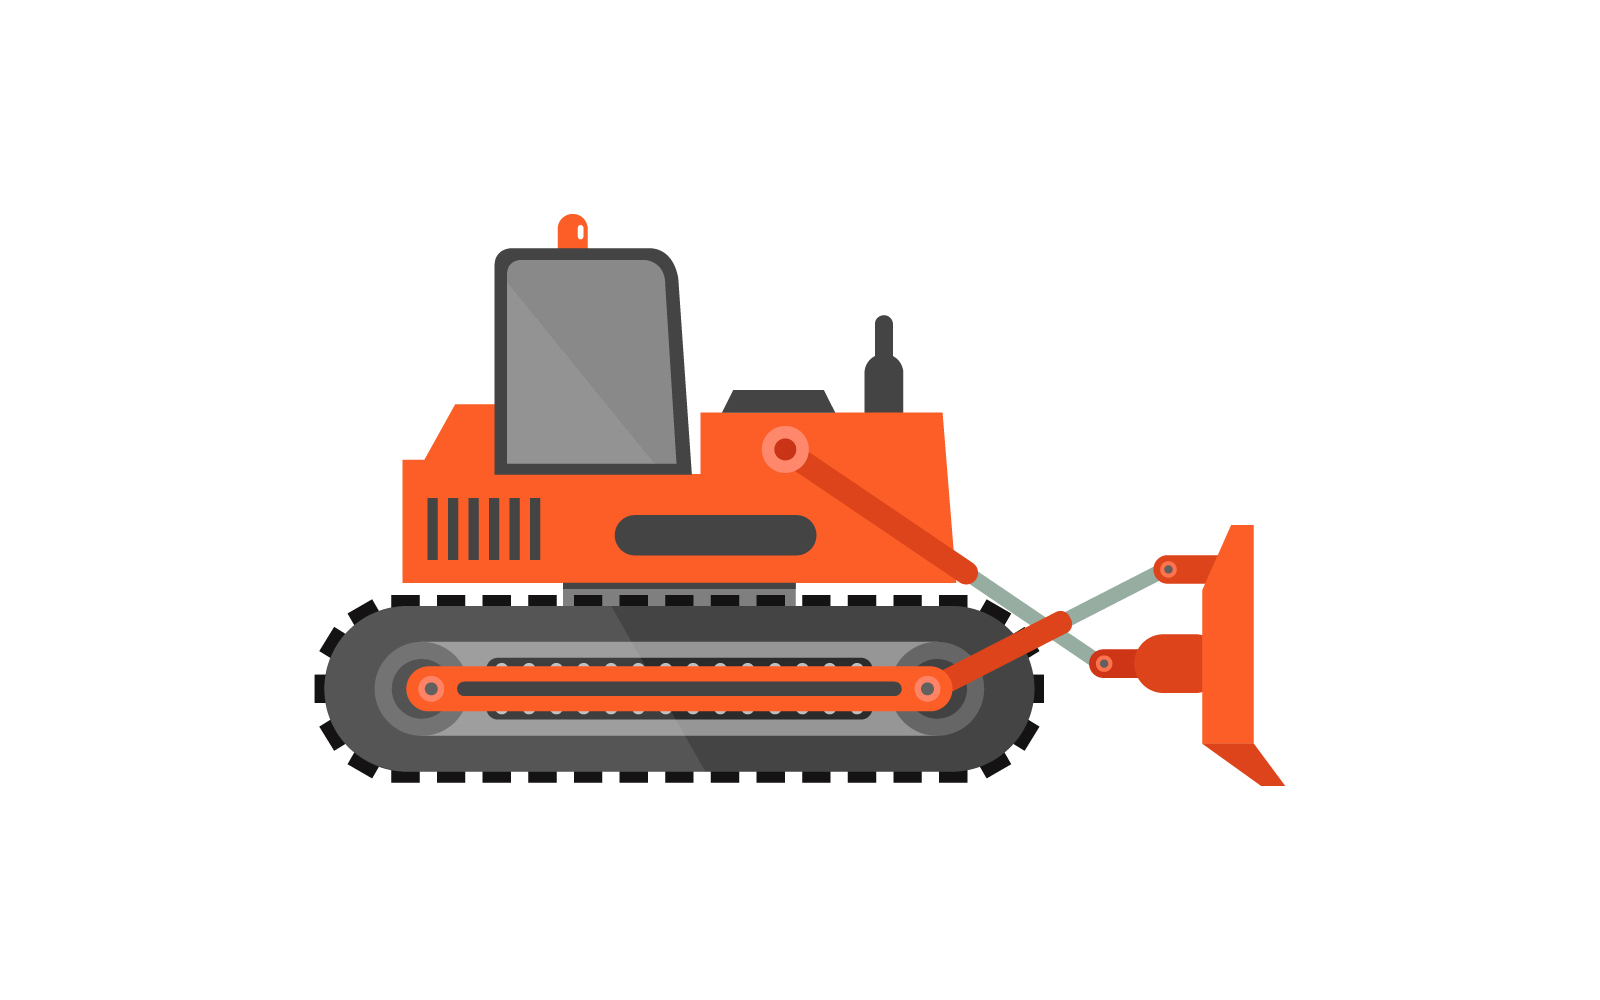 Excavator illustrated in vector and colored on a white